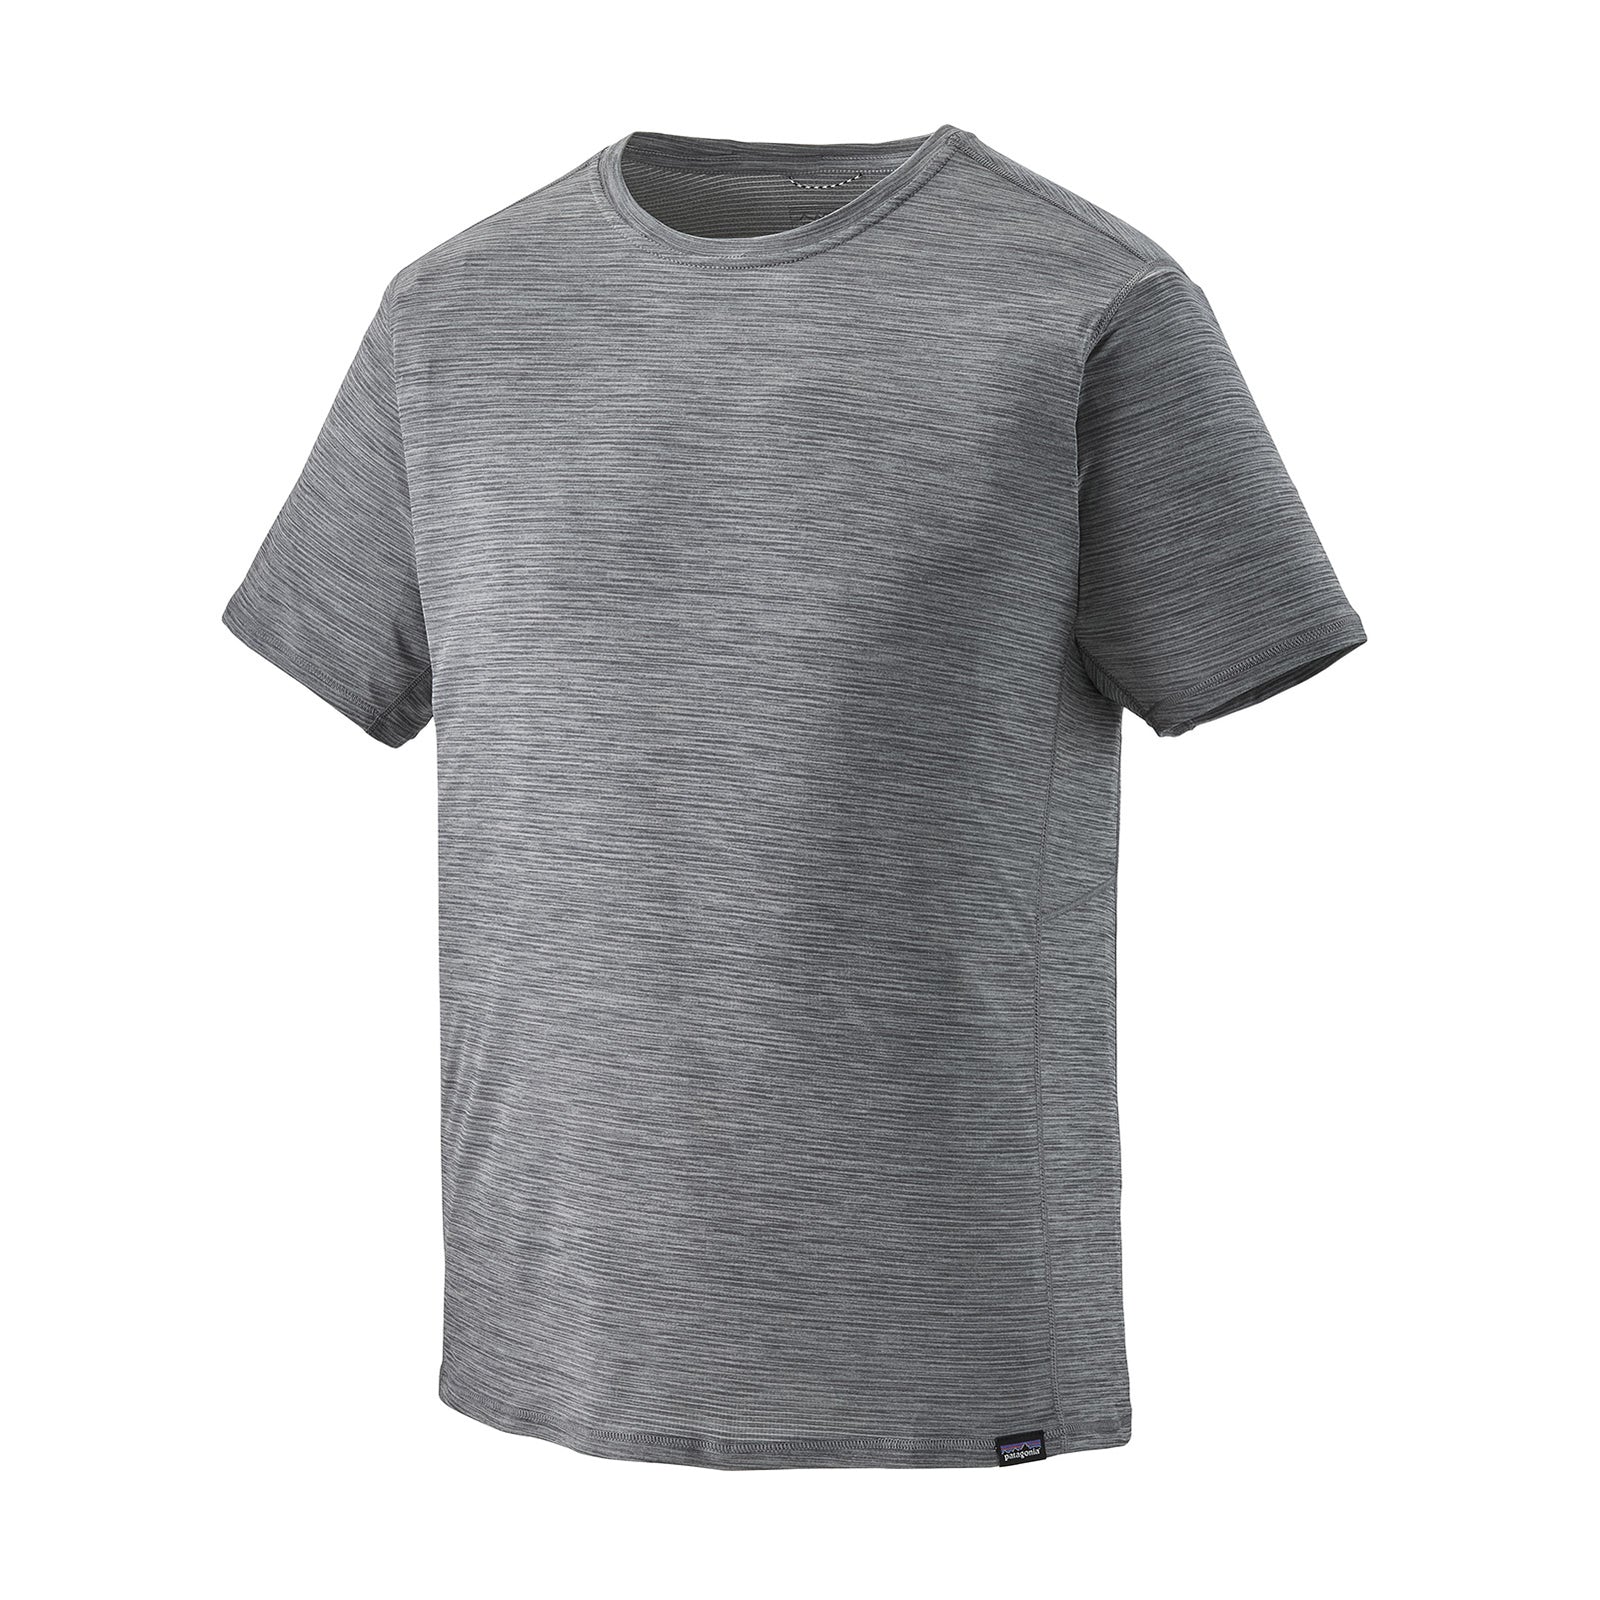 patagonia mens short sleeve capilene cool lightweight shirt in forge grey feather grey x dye, front view